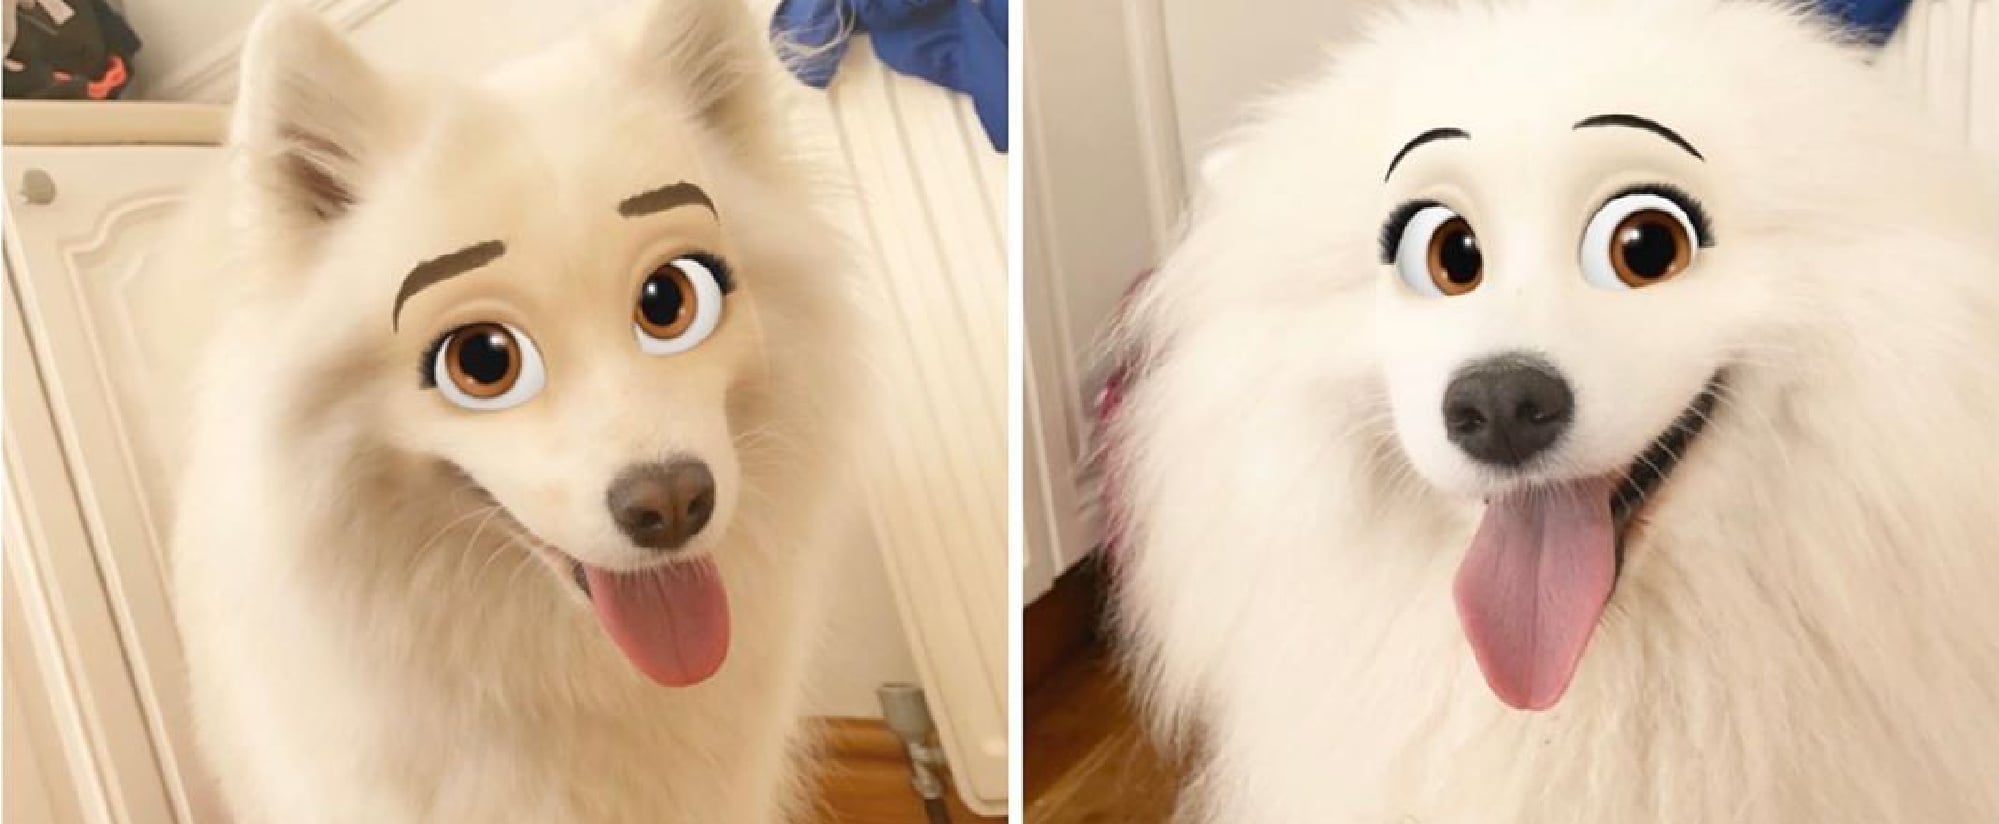 Snapchat Filter That Turns Pets Into Disney Characters | POPSUGAR Pets